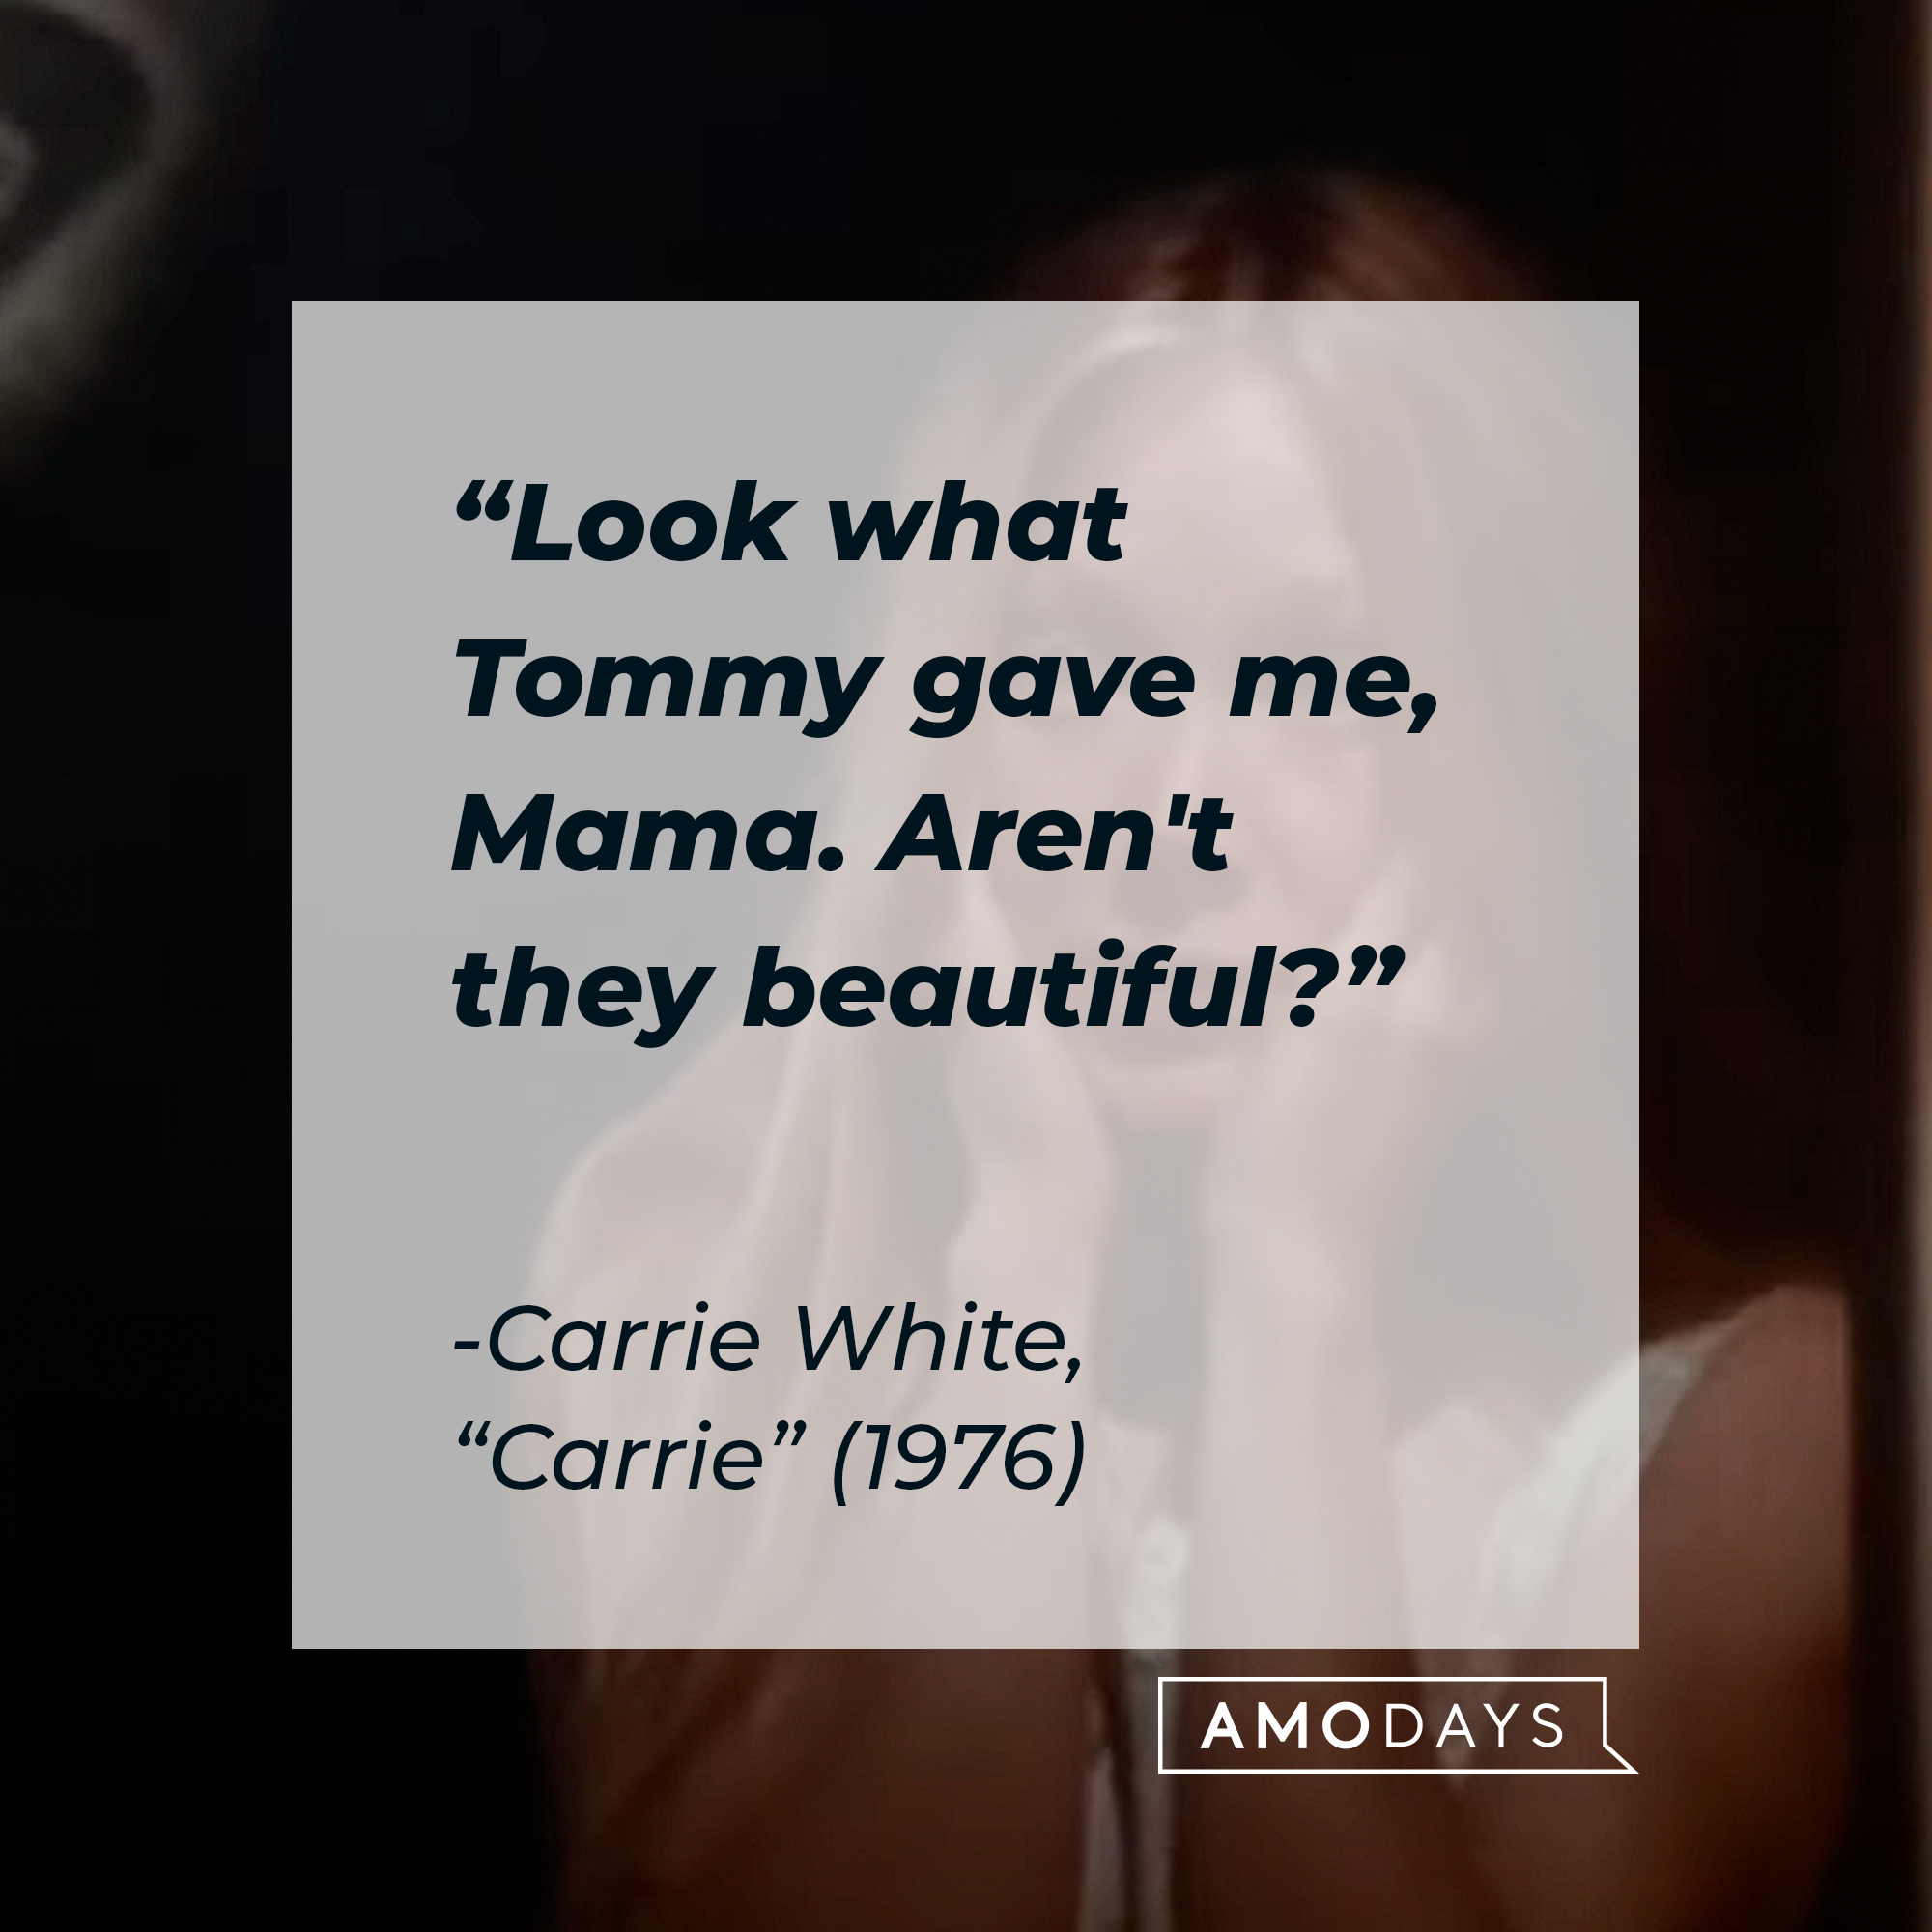 Carrie White's quote: "Look what Tommy gave me, Mama. Aren't they beautiful?” | Source: youtube.com/MGMStudios